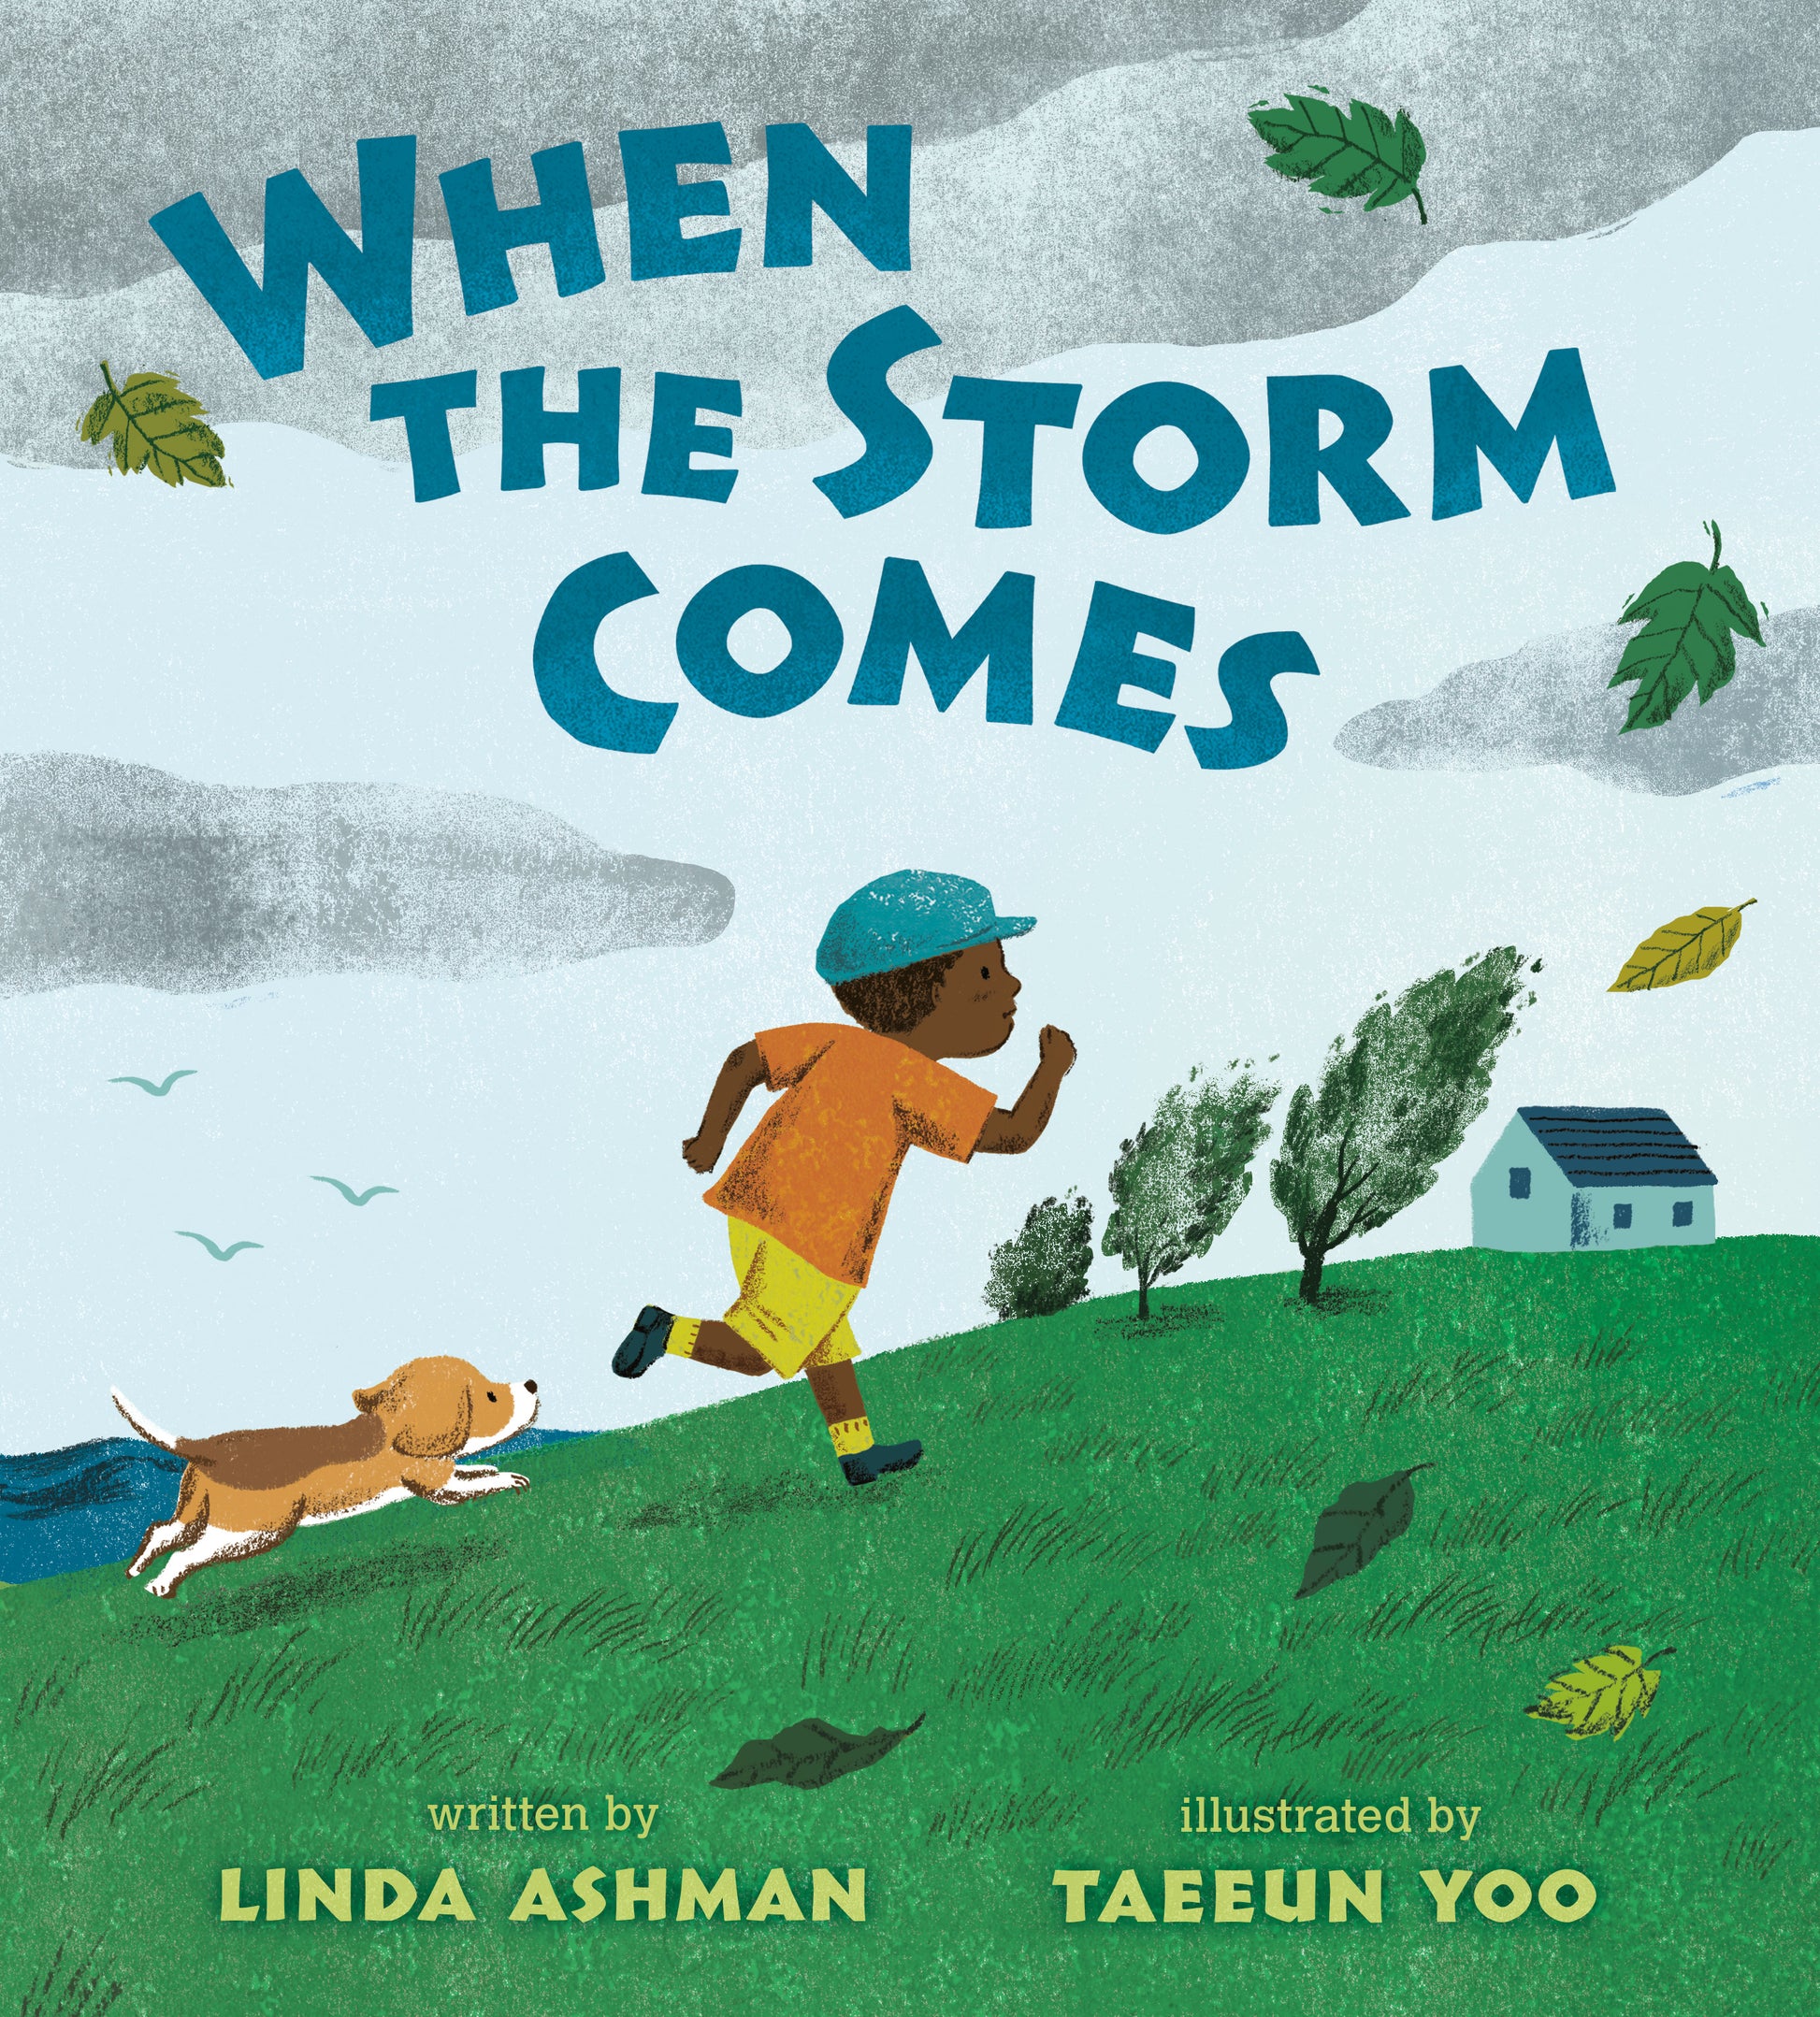 When The Storm Comes by Linda Ashman.  A young boy and his dog run toward a house in the distance, storm clouds are above and leaves are blowing around. 